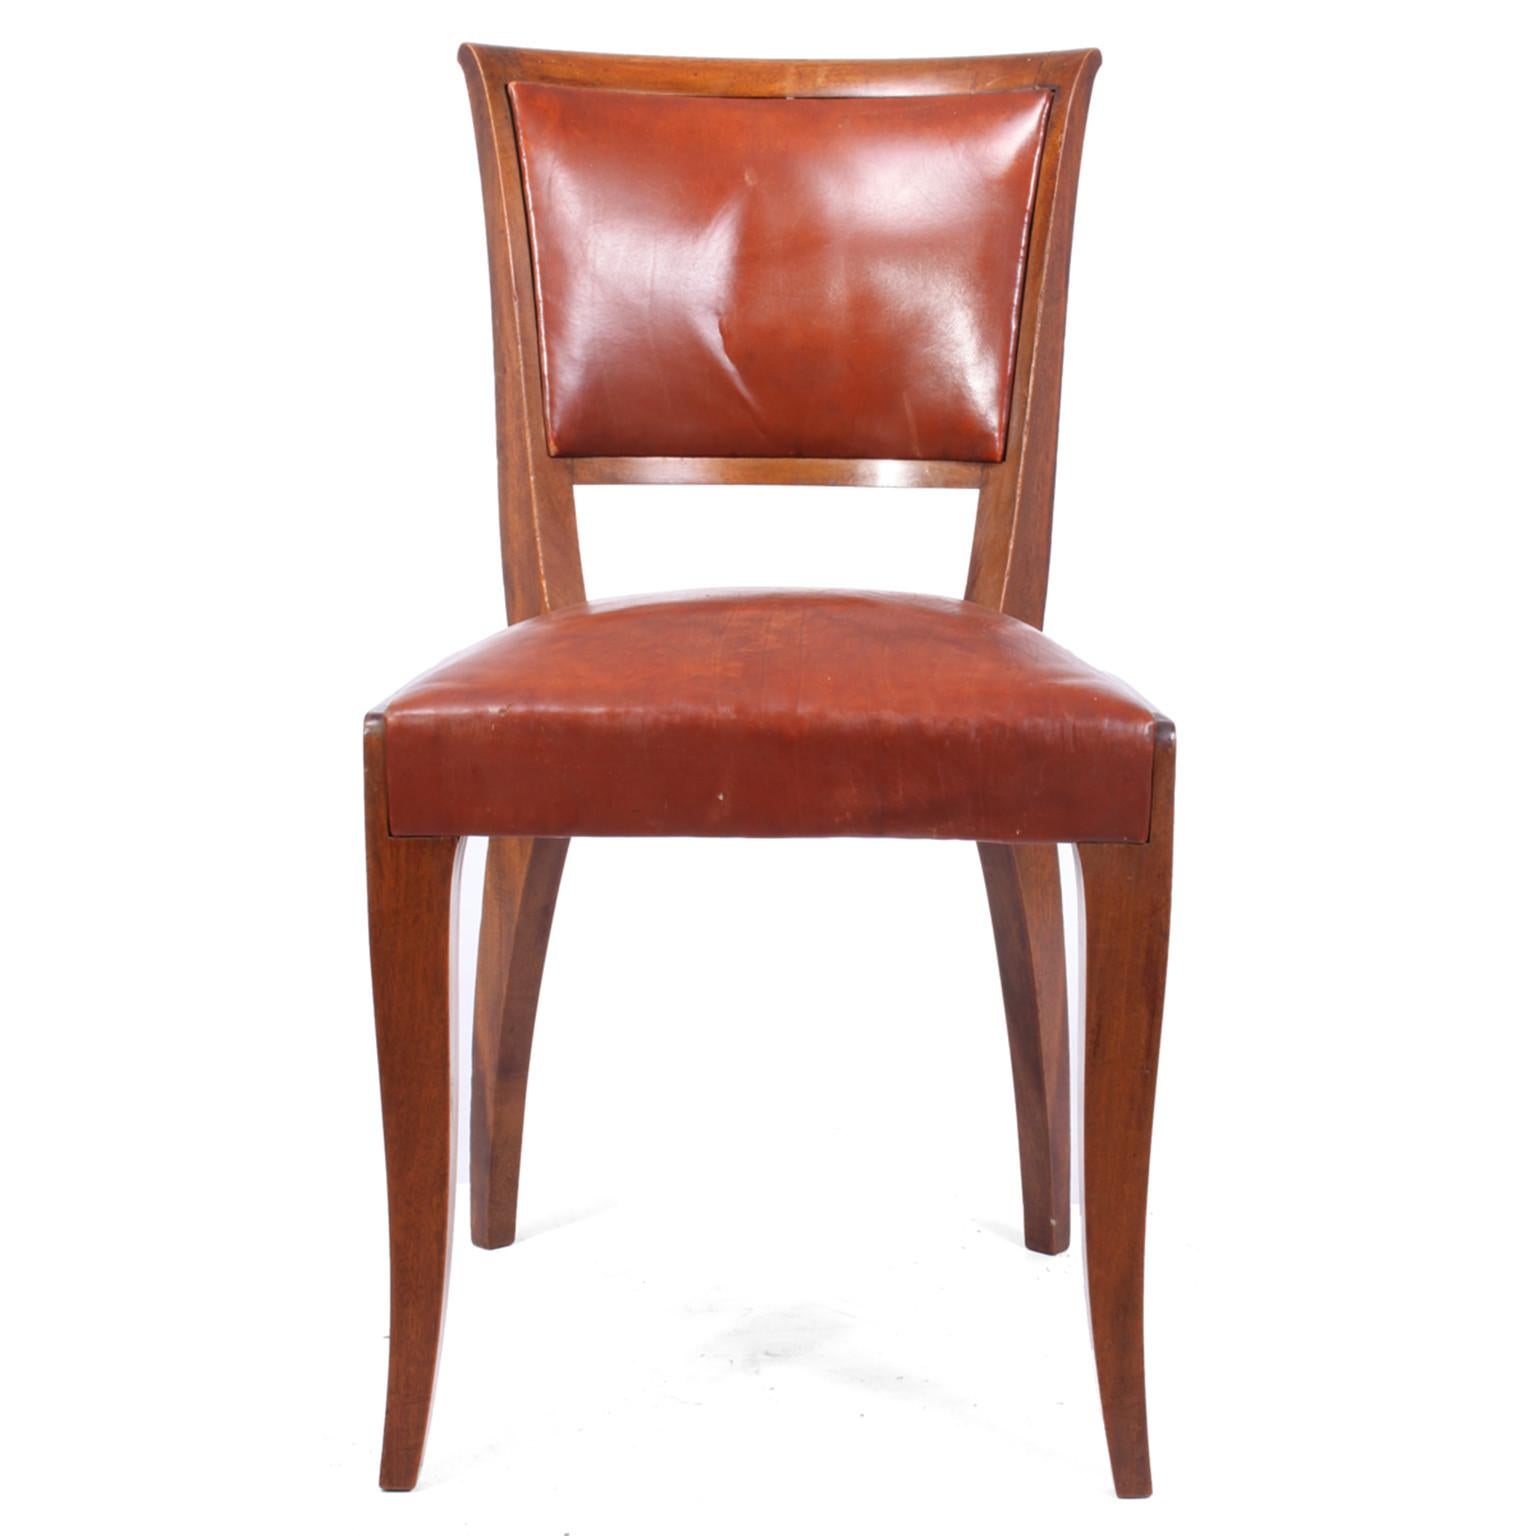 Mid-20th Century French Art Deco Dining Chairs, circa 1930